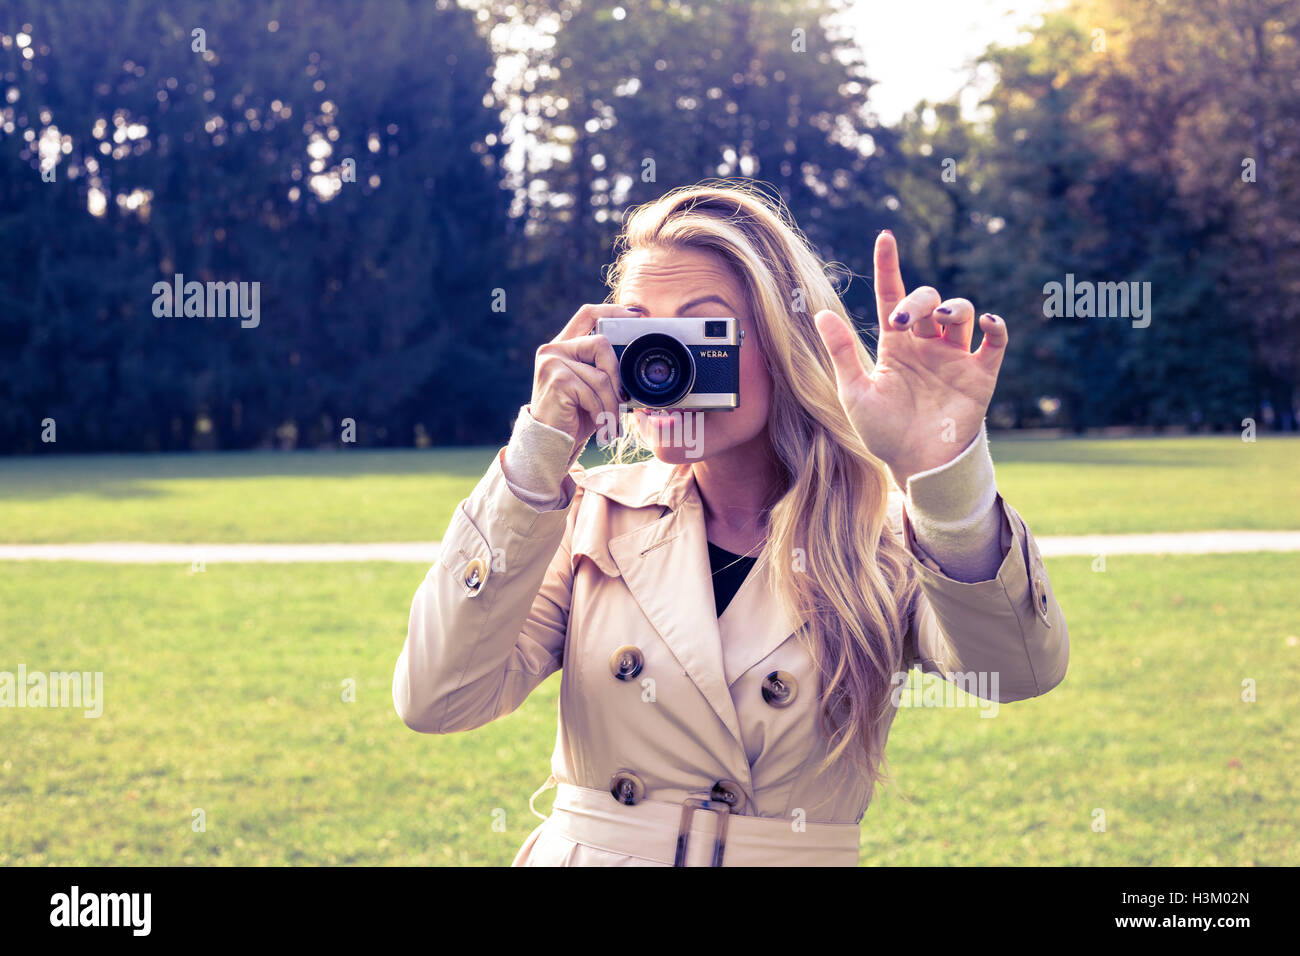 Attention, female is taking picture with old foto camera Stock Photo